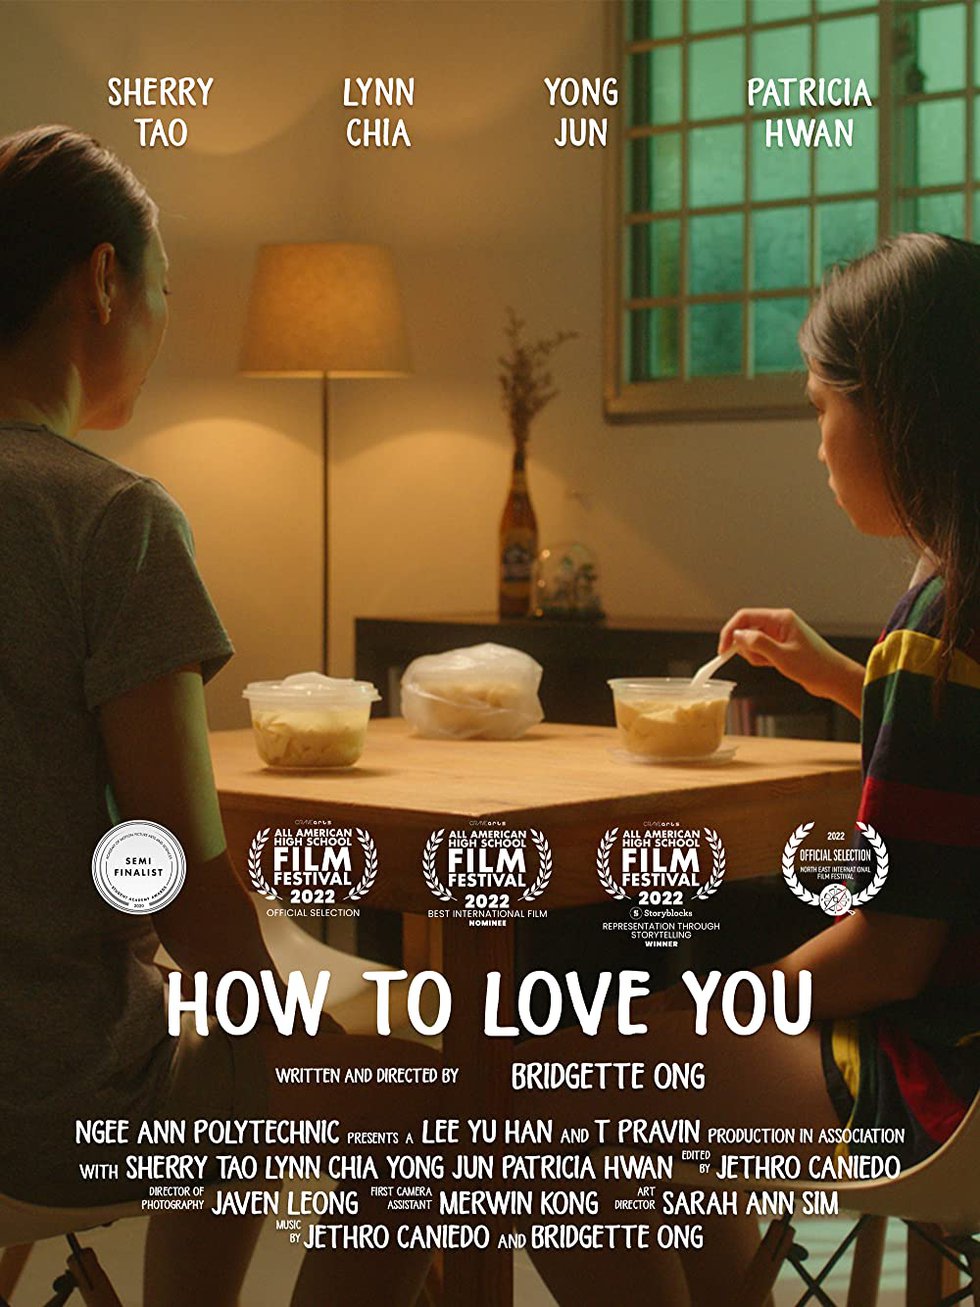 How to Love You LGBTQ Short Film